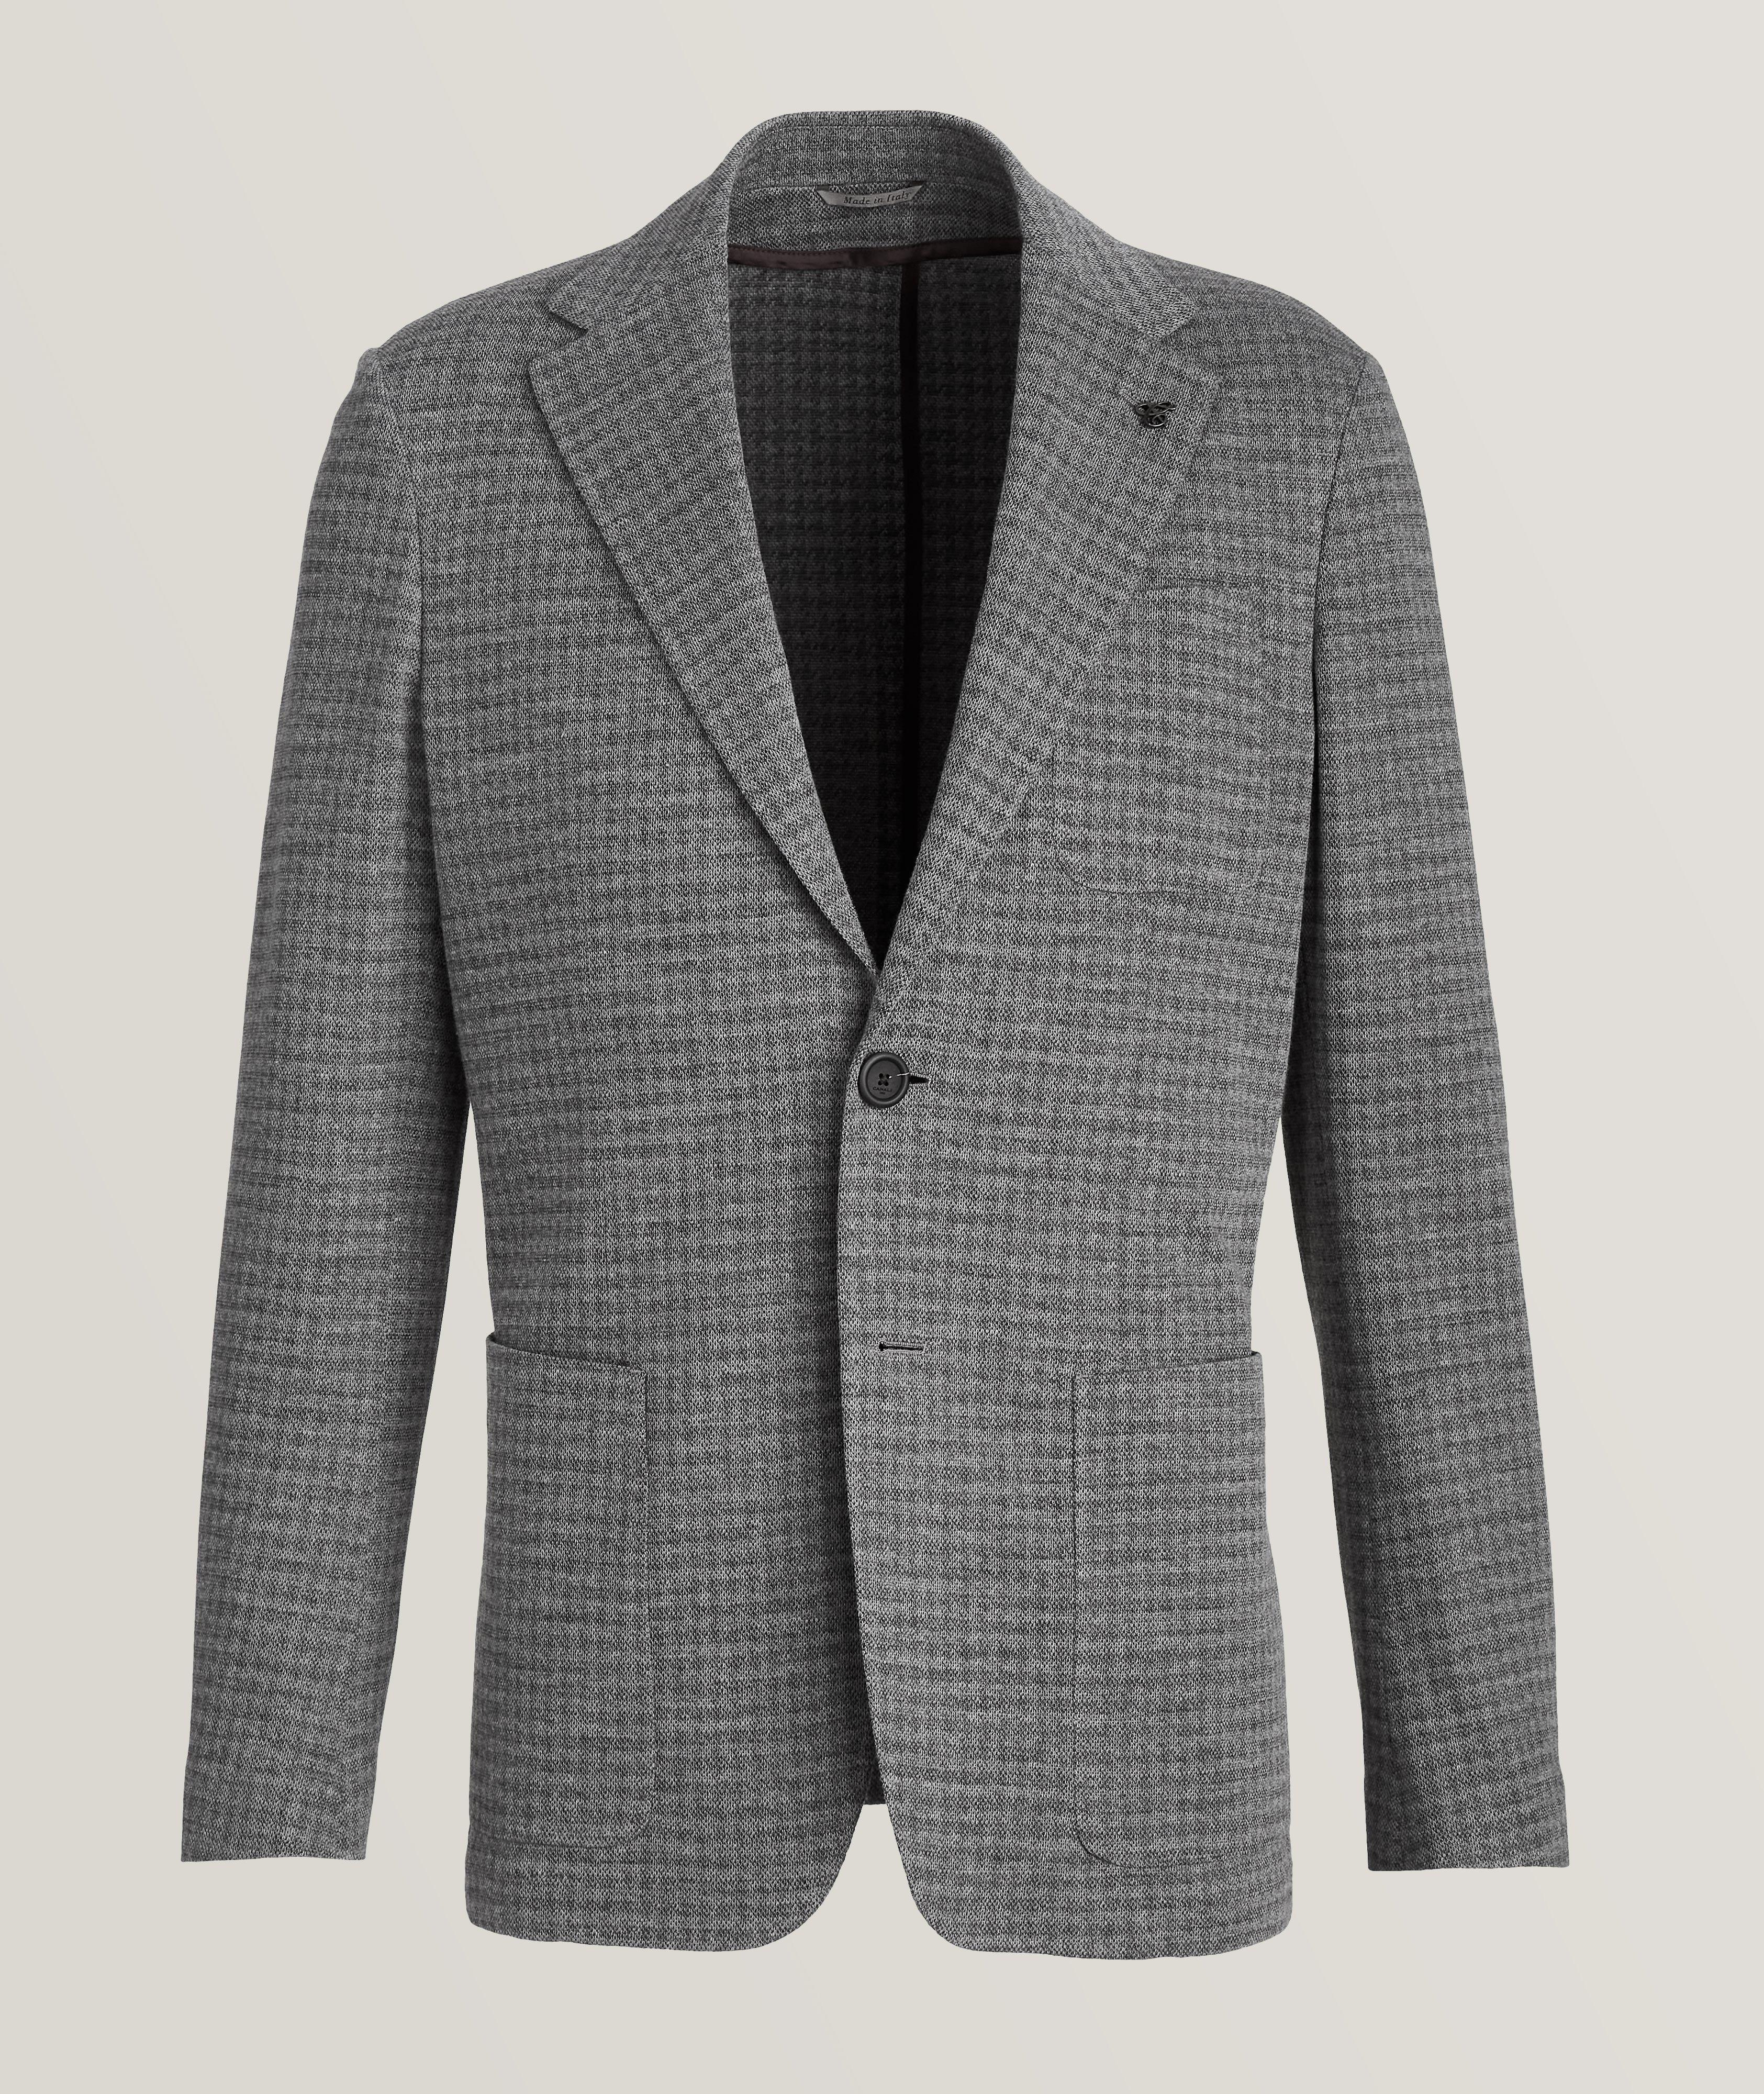 Houndstooth Jersey Cotton-Wool Sport Jacket image 0